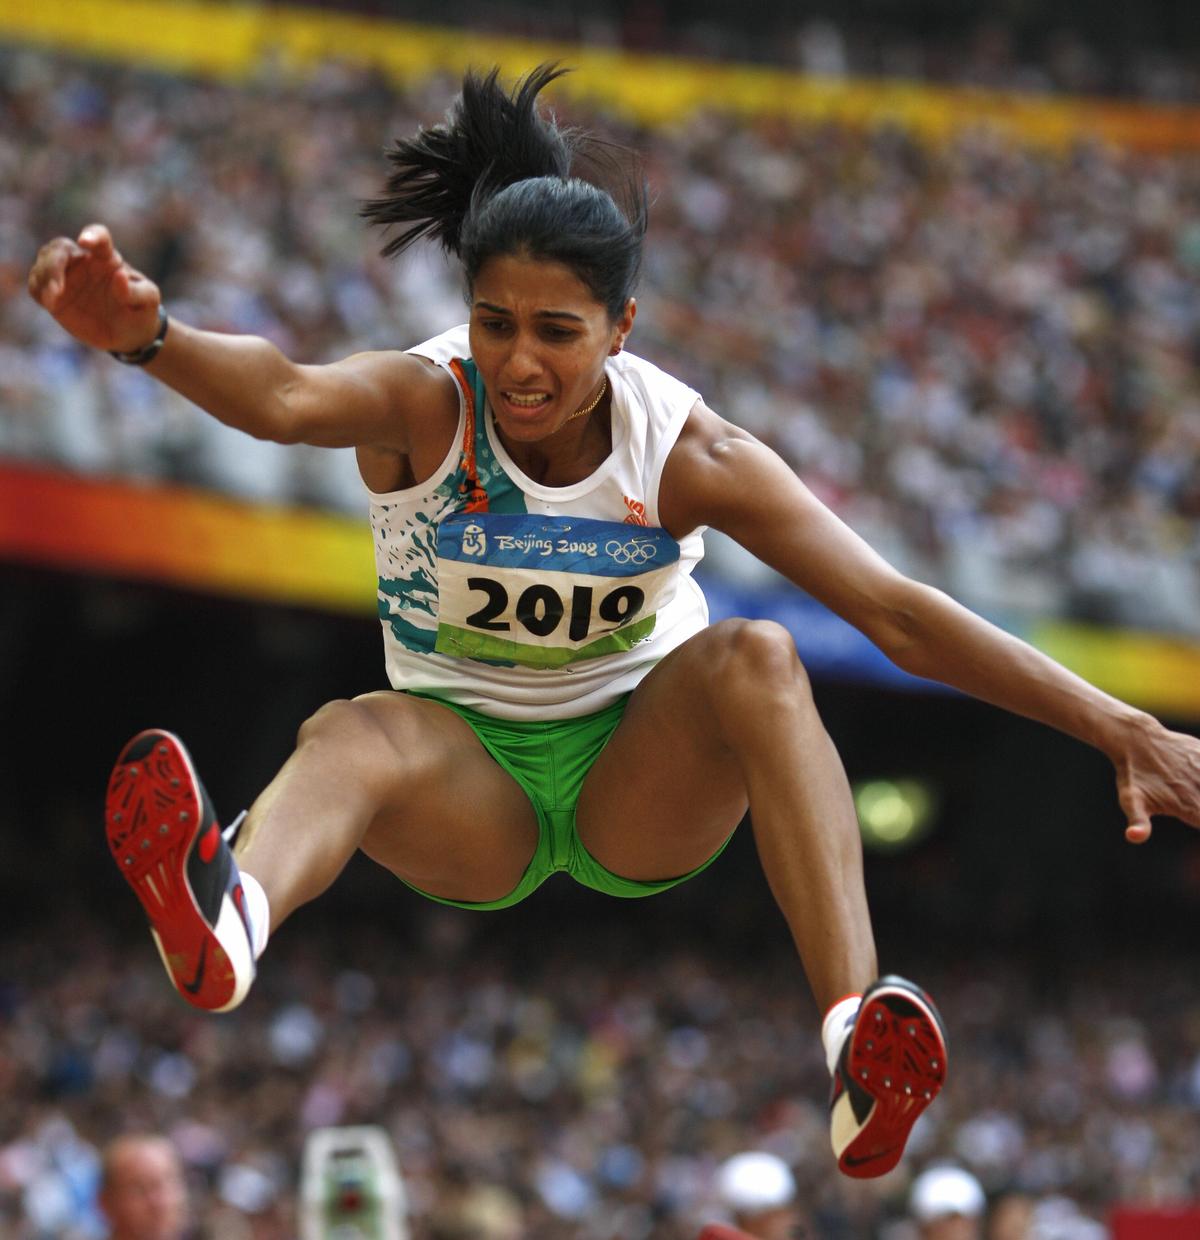 High flyer: Anju is one of the best athletes in India.  Years after his retirement, he still holds the national long jump record.  |  Photo credit: Getty Images